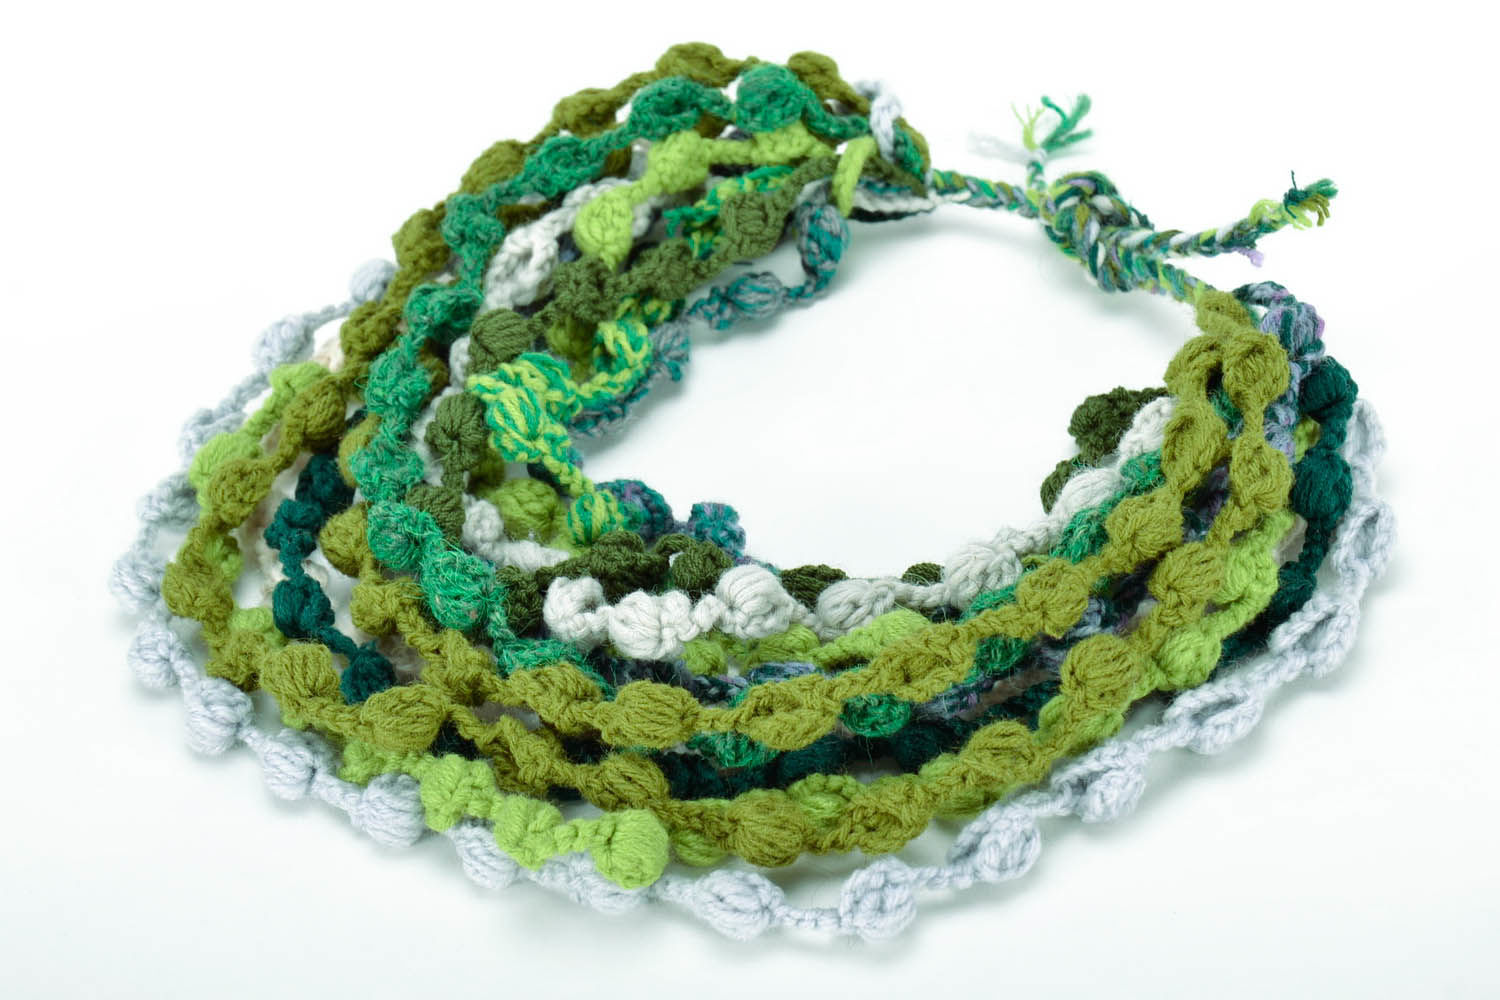 Crocheted bead necklace photo 1